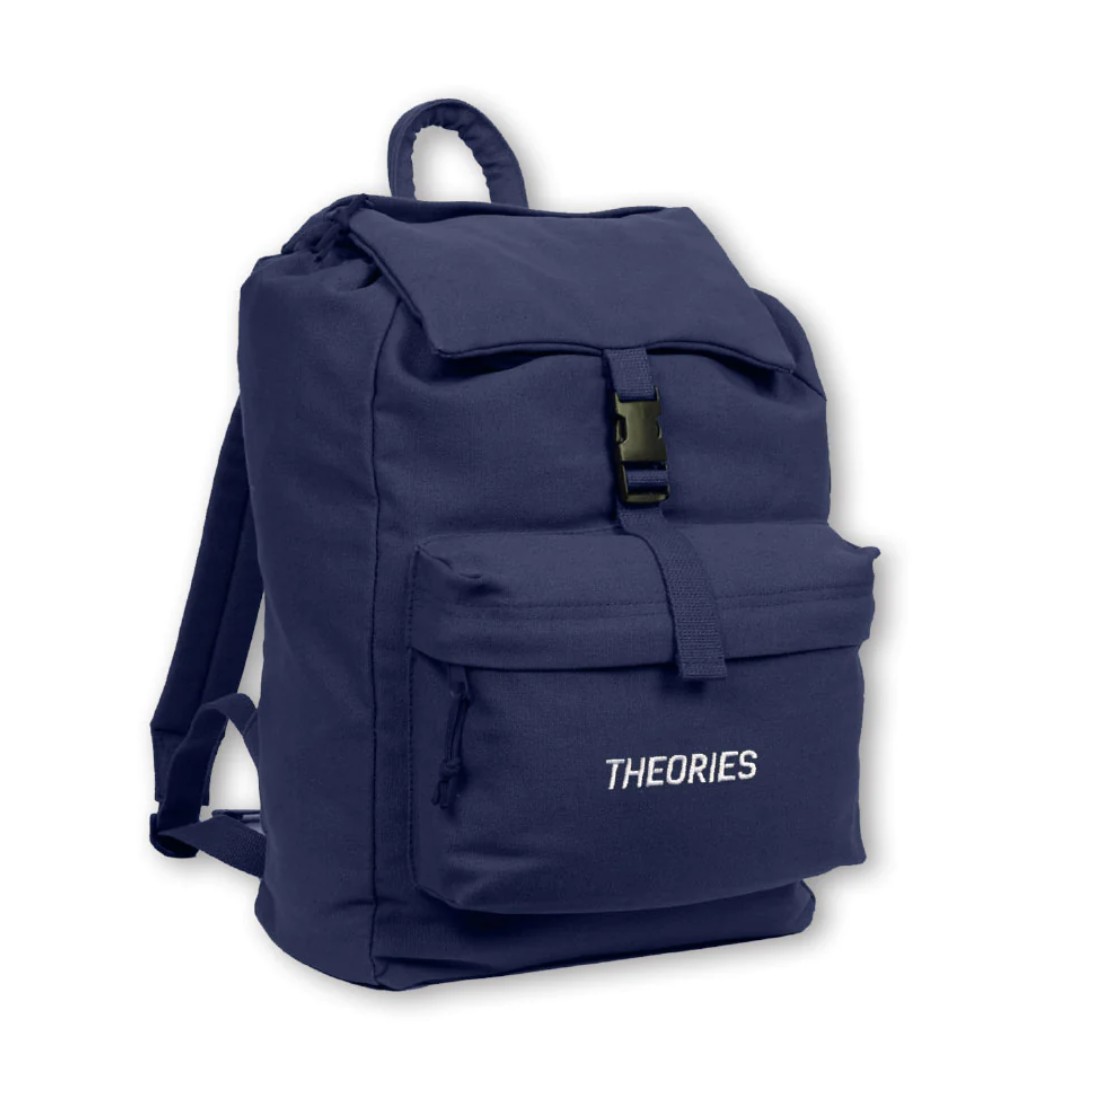 Theories - Canvas Backpack